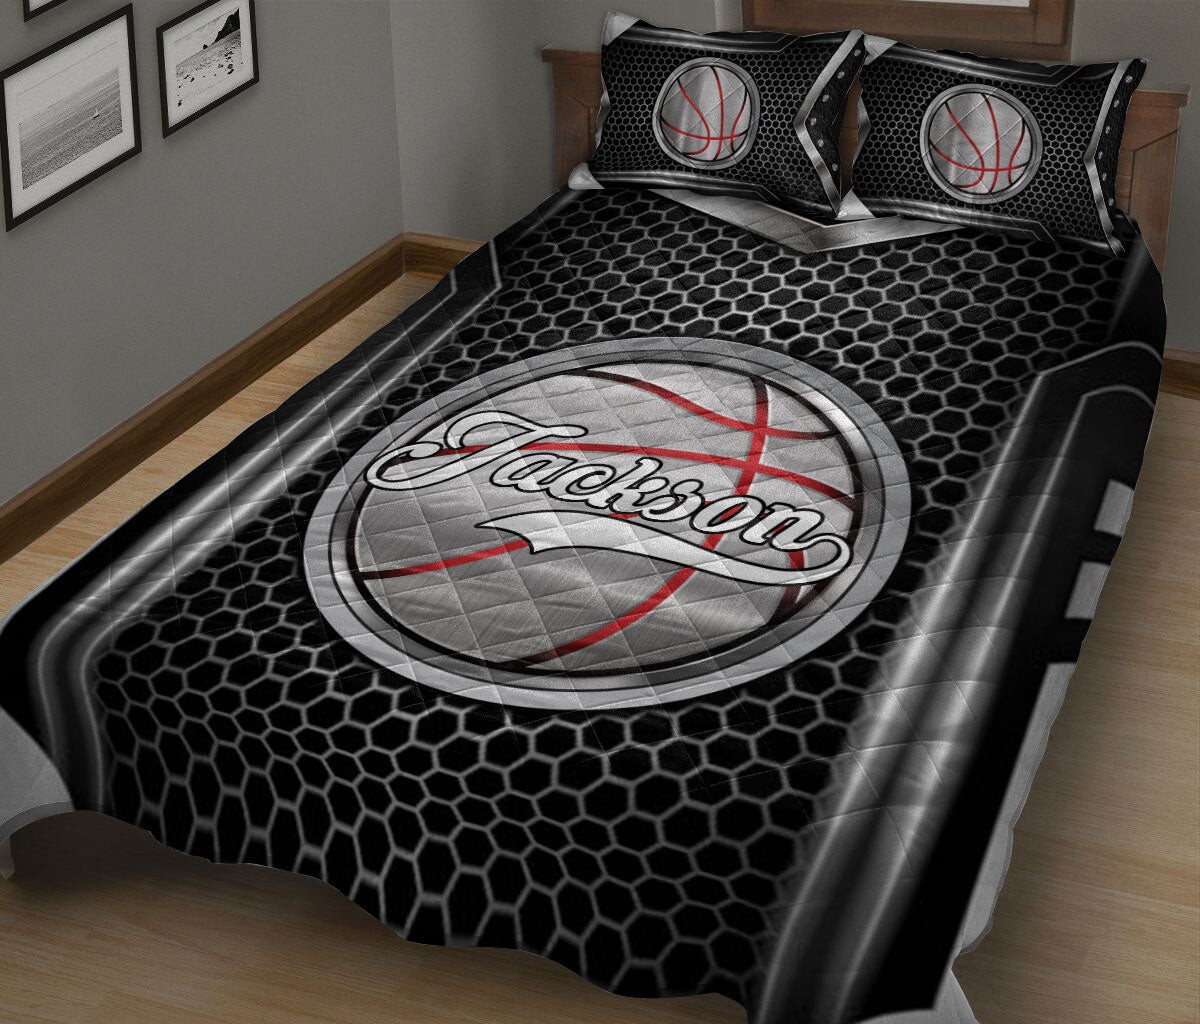 Ohaprints-Quilt-Bed-Set-Pillowcase-Basketball-Ball-Gift-For-Sport-Lover-B&W-Pattern-Custom-Personalized-Name-Blanket-Bedspread-Bedding-176-King (90'' x 100'')